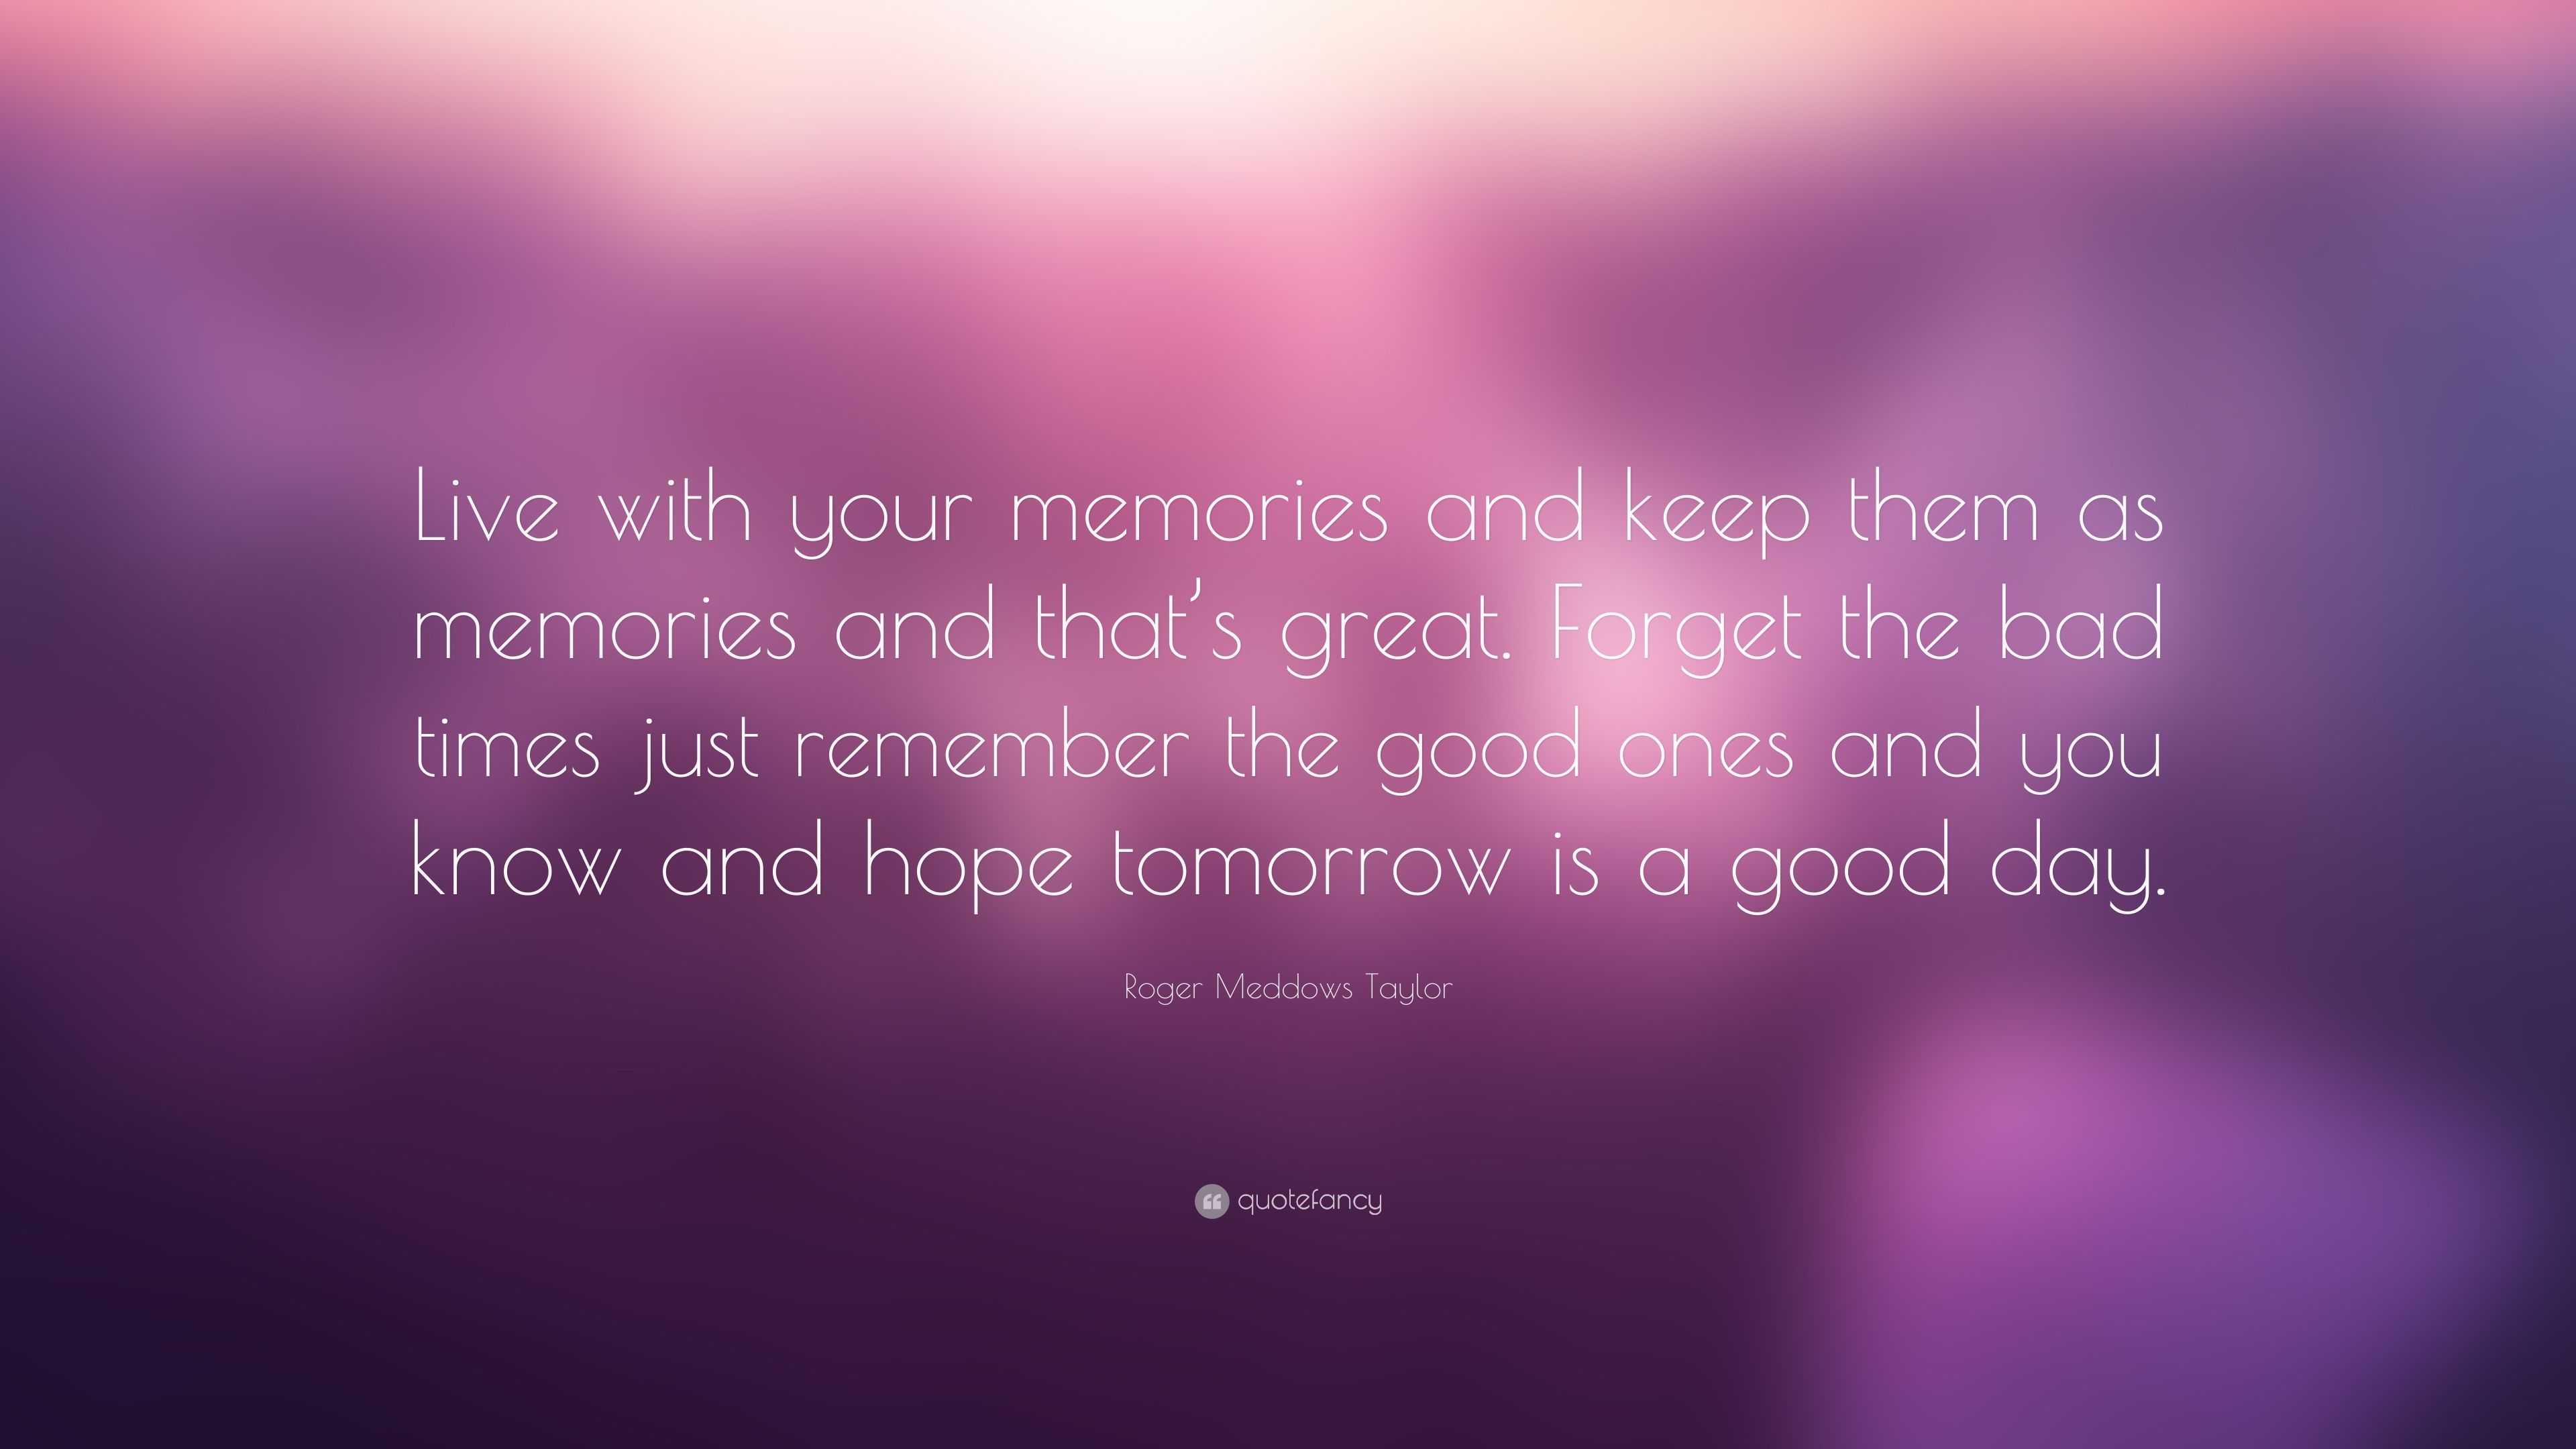 Roger Meddows Taylor Quote: “Live with your memories and keep them as ...